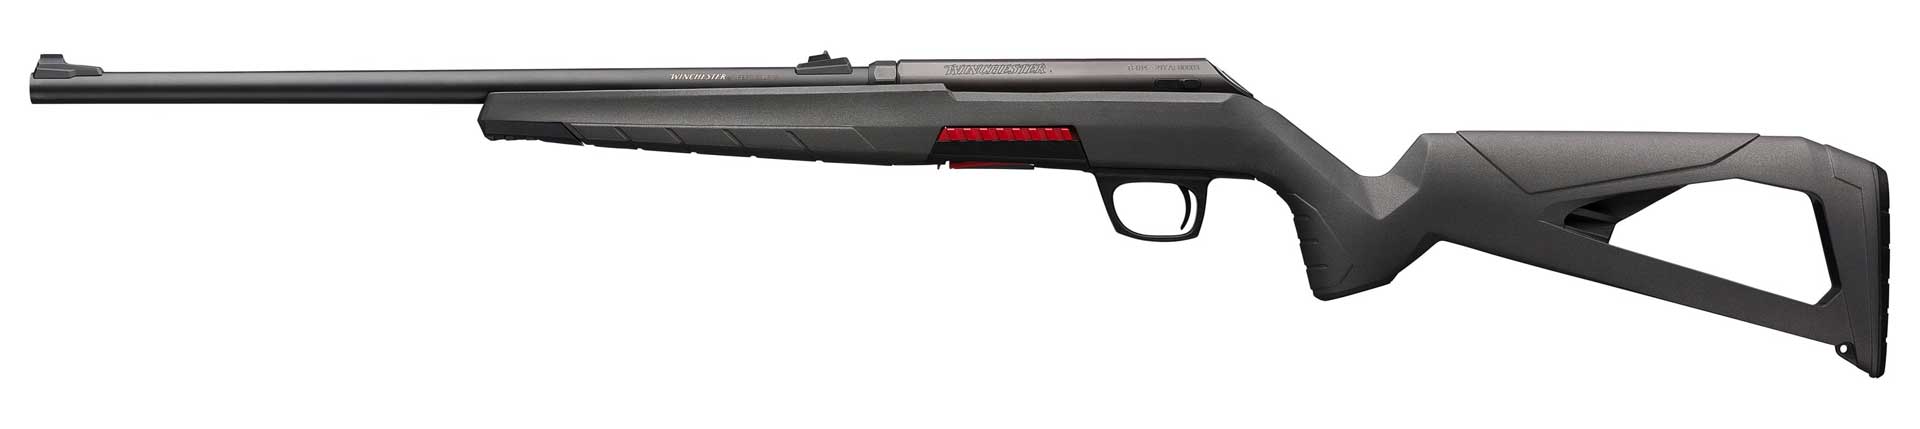 Winchester Xpert 22 LR left-side view full-length rifle bolt-action gray plastic stock red trim black steel action and barrel